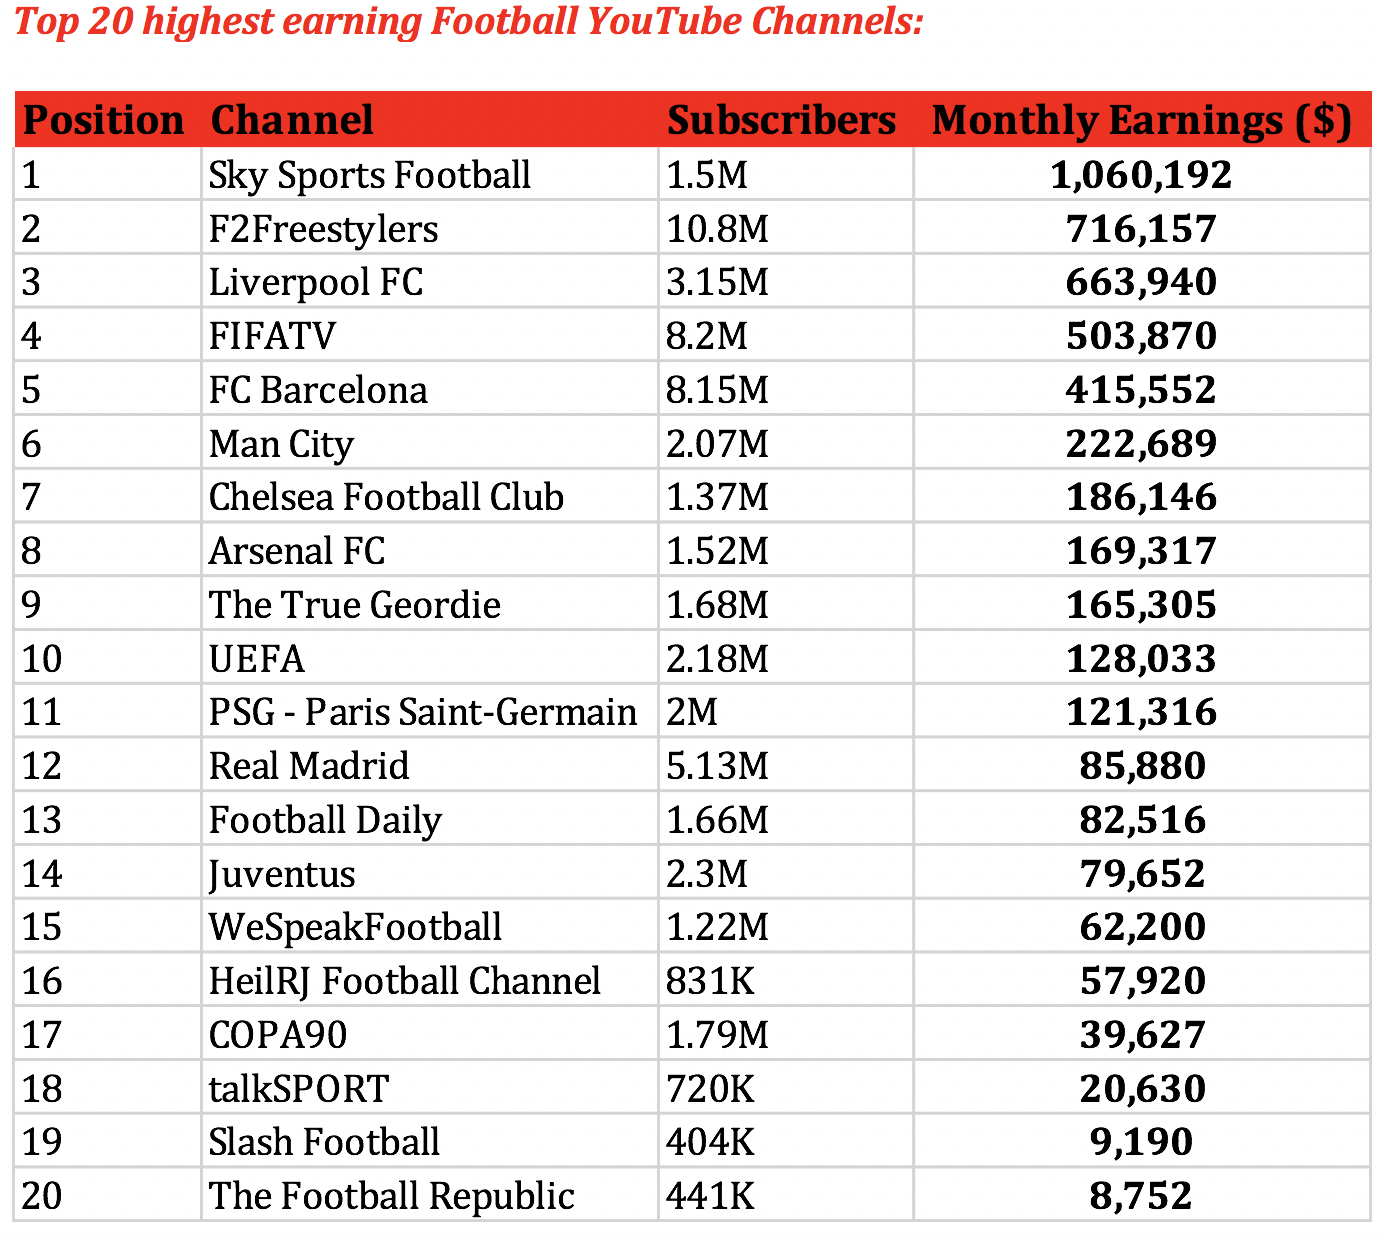 Sky Sports earns $1m a month from YouTube, Liverpool are platforms leading club